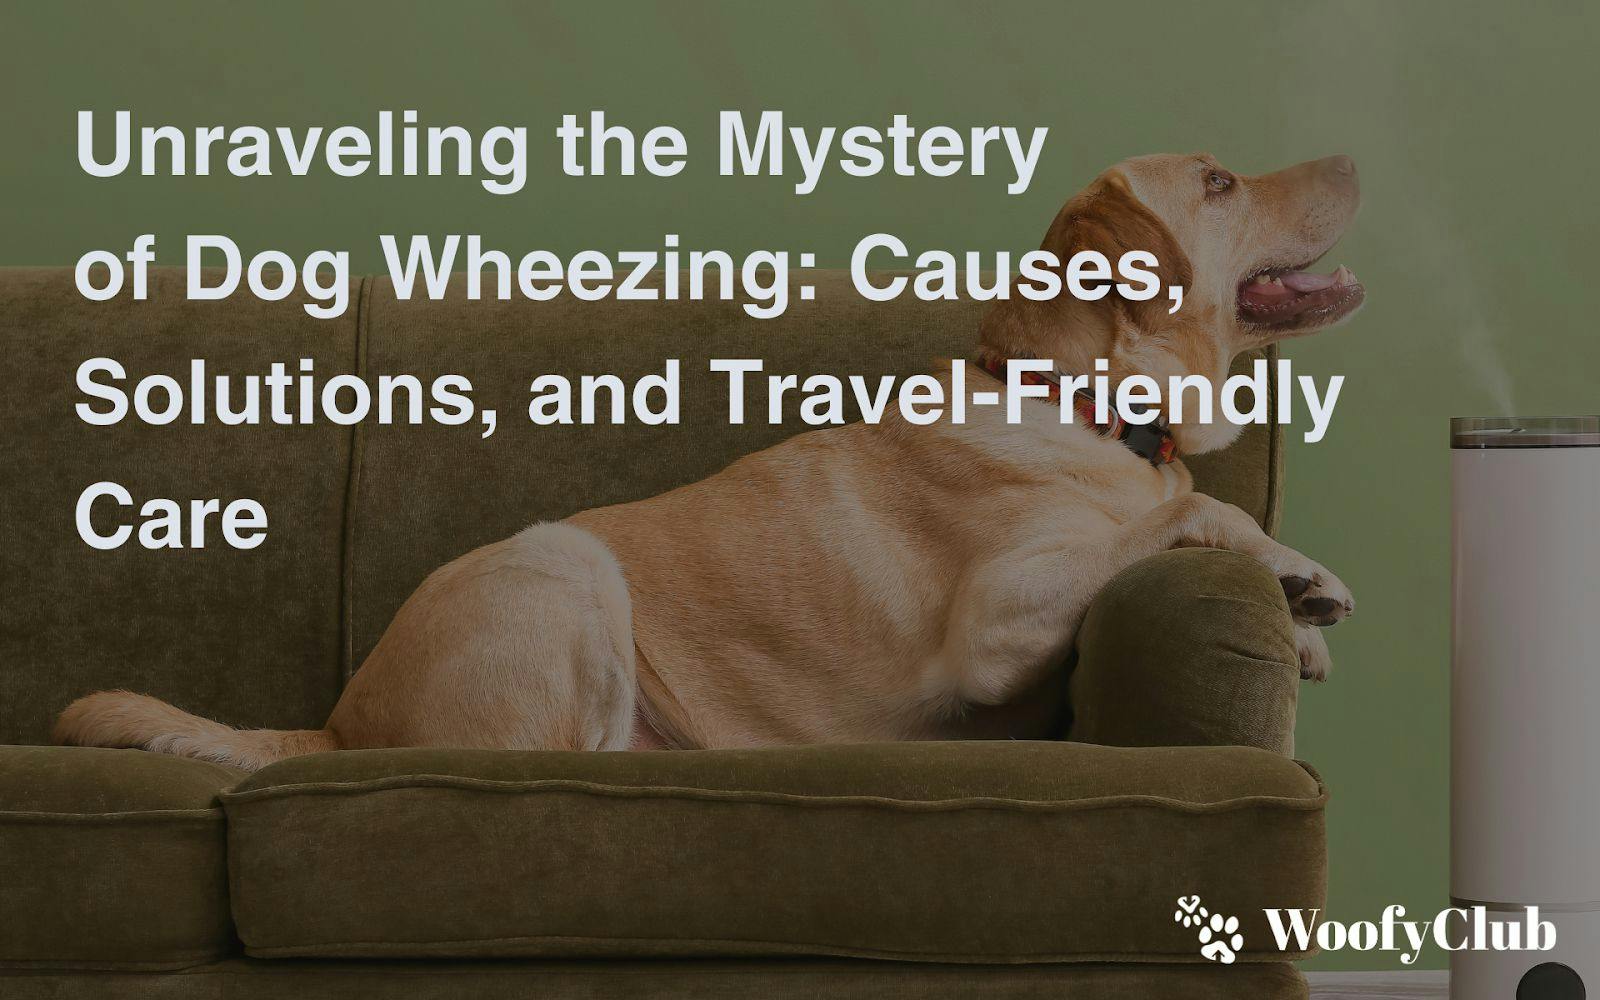 Unraveling The Mystery Of Dog Wheezing: Causes, Solutions, And Travel-Friendly Care